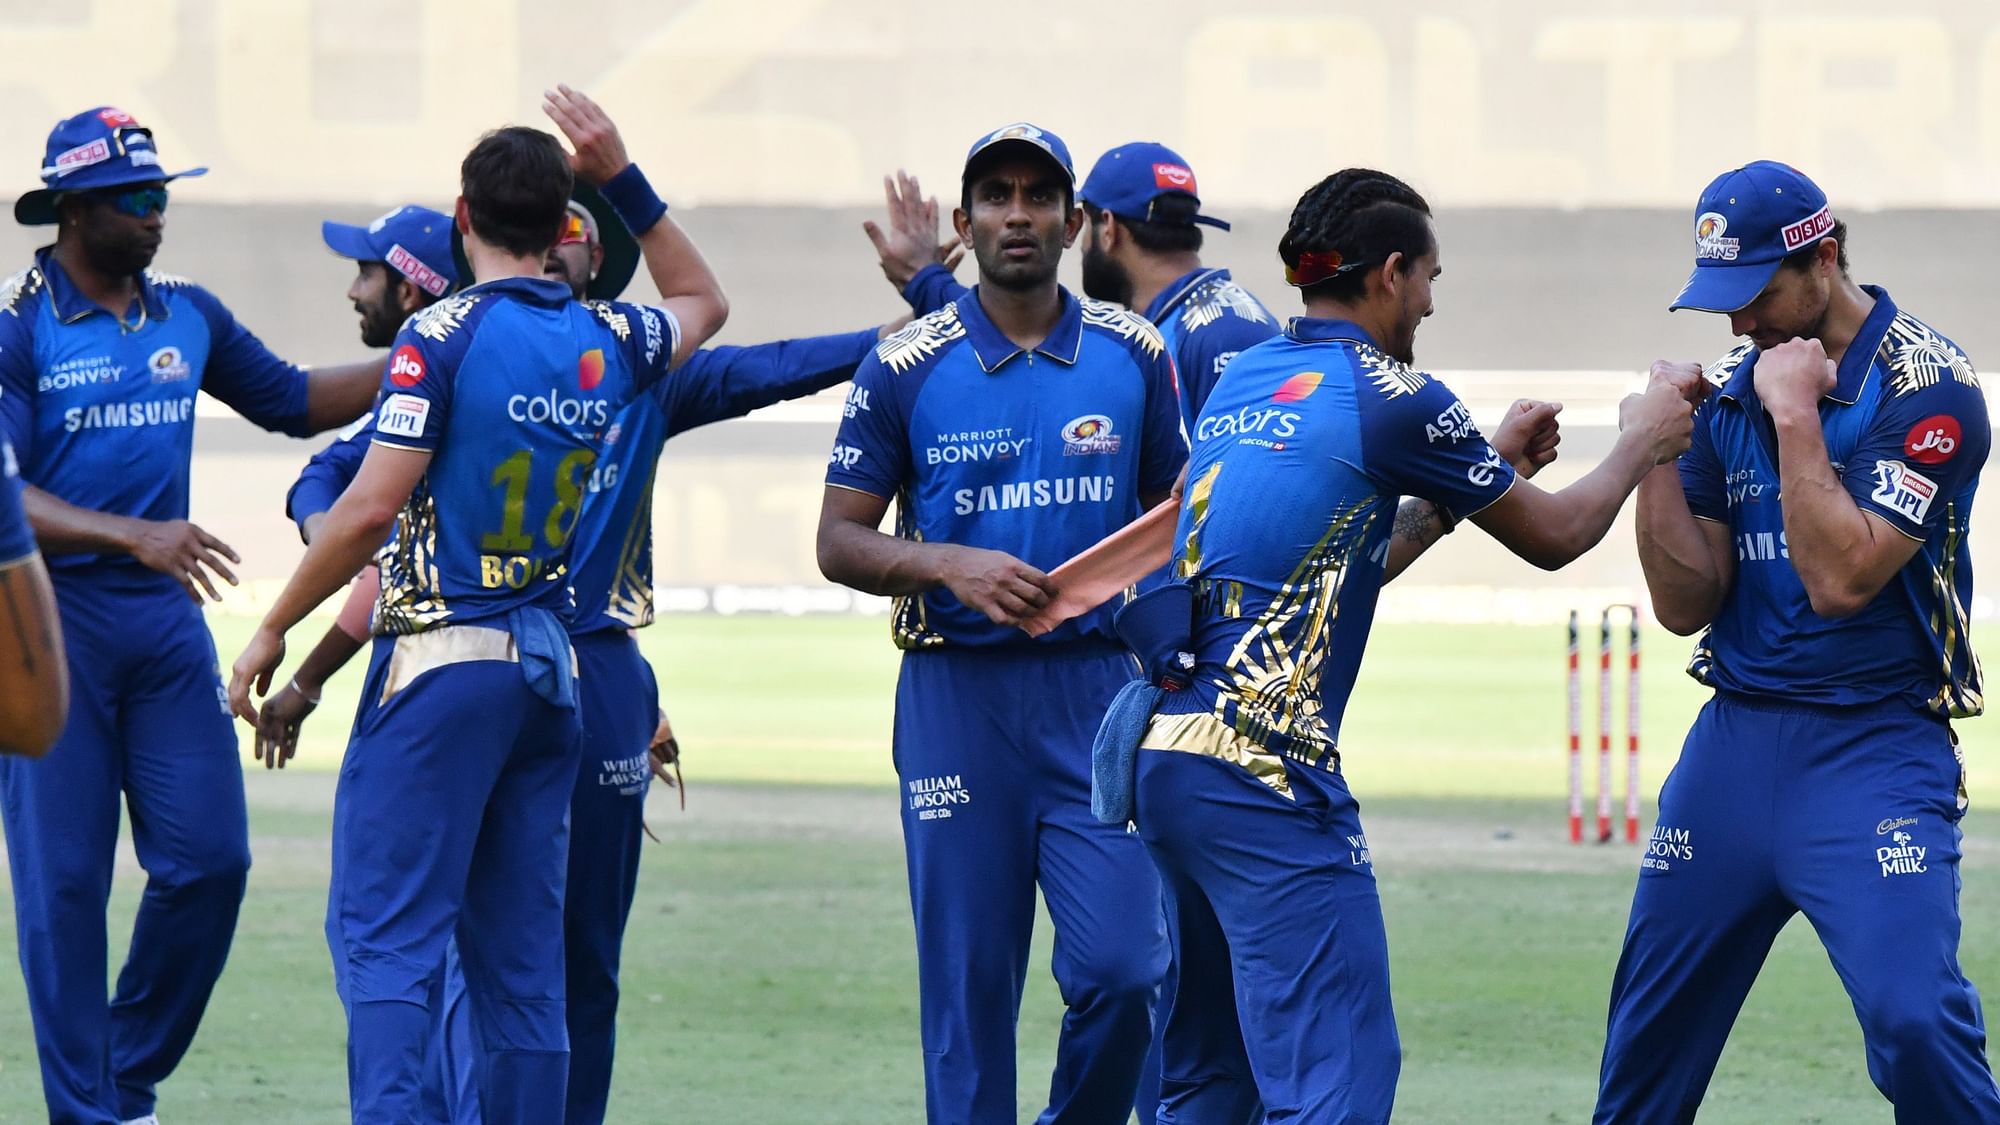 Mumbai Indians (MI)  strolled to a nine-wicket win over Delhi Capitals (DC) in the Indian Premier League